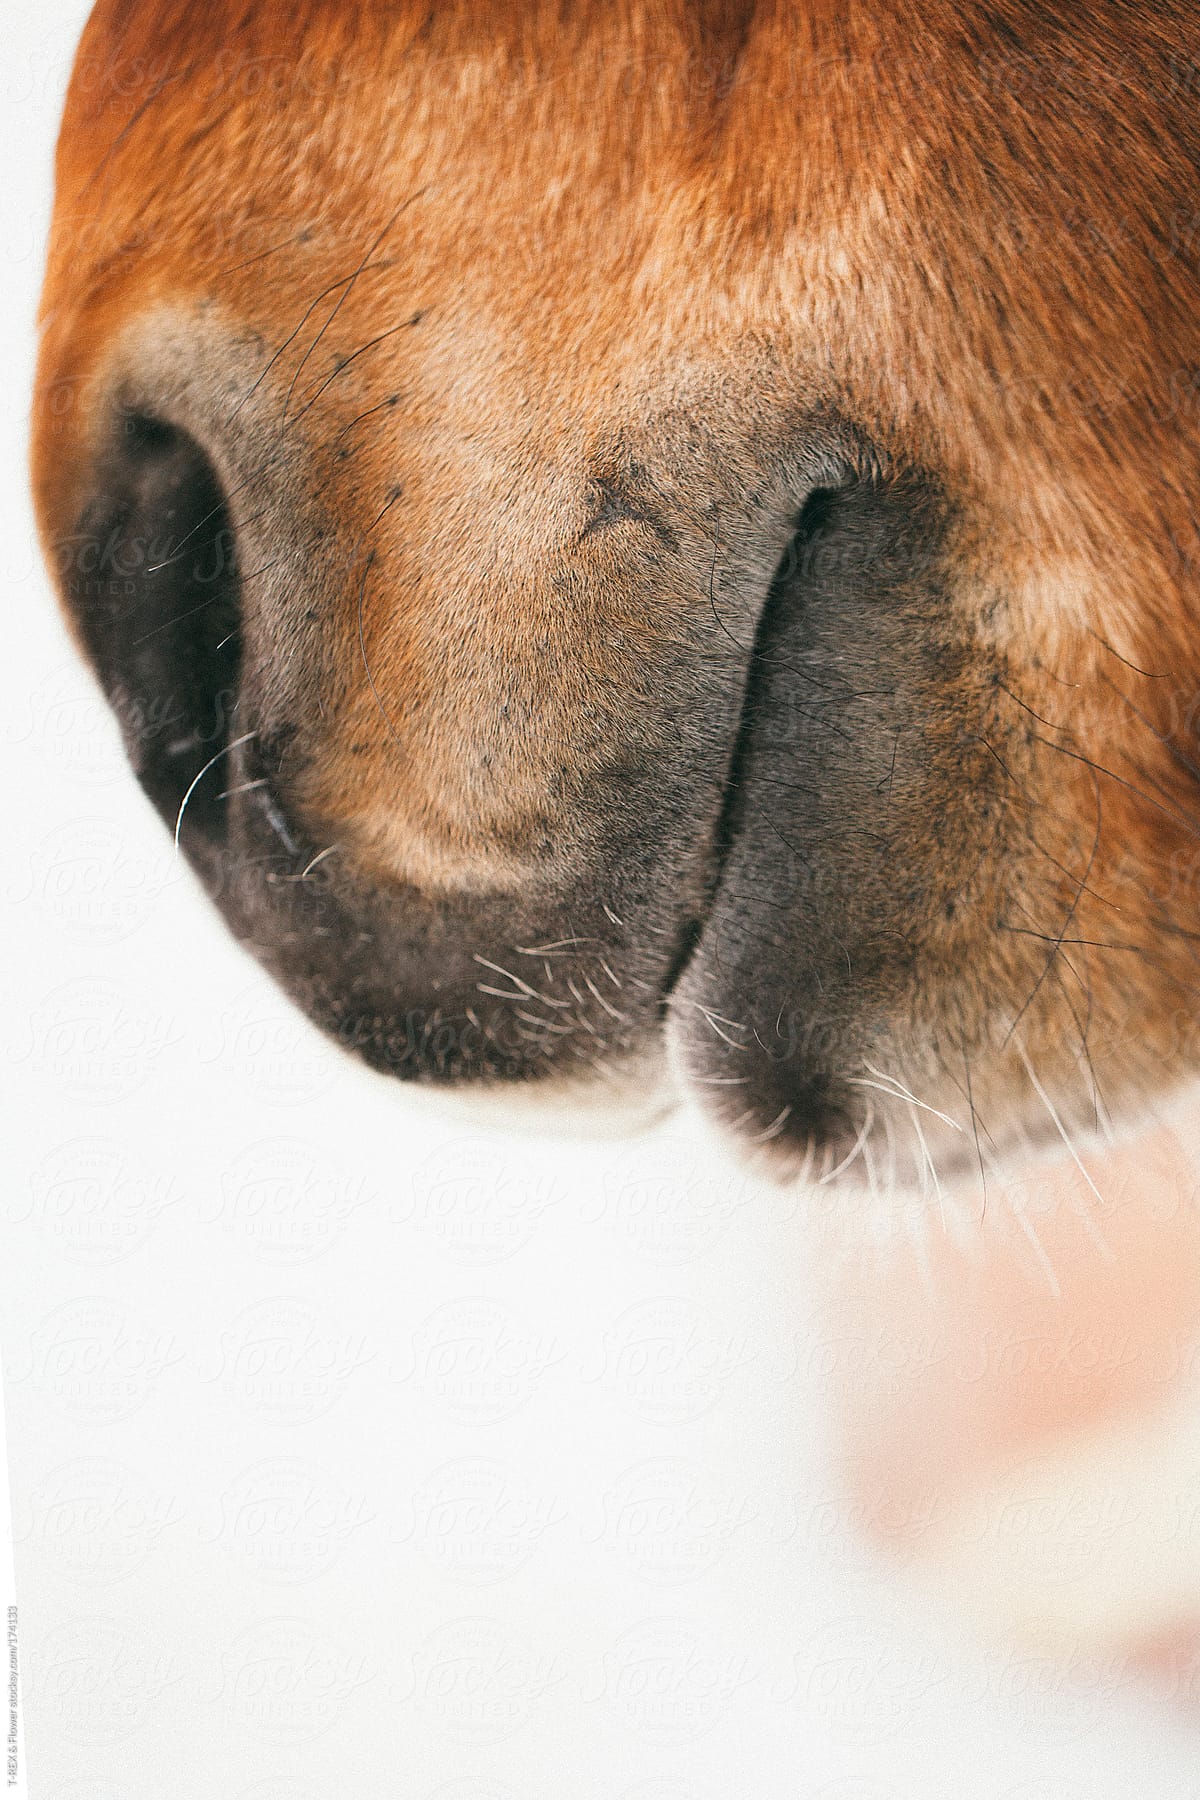 The chestnut horse nose